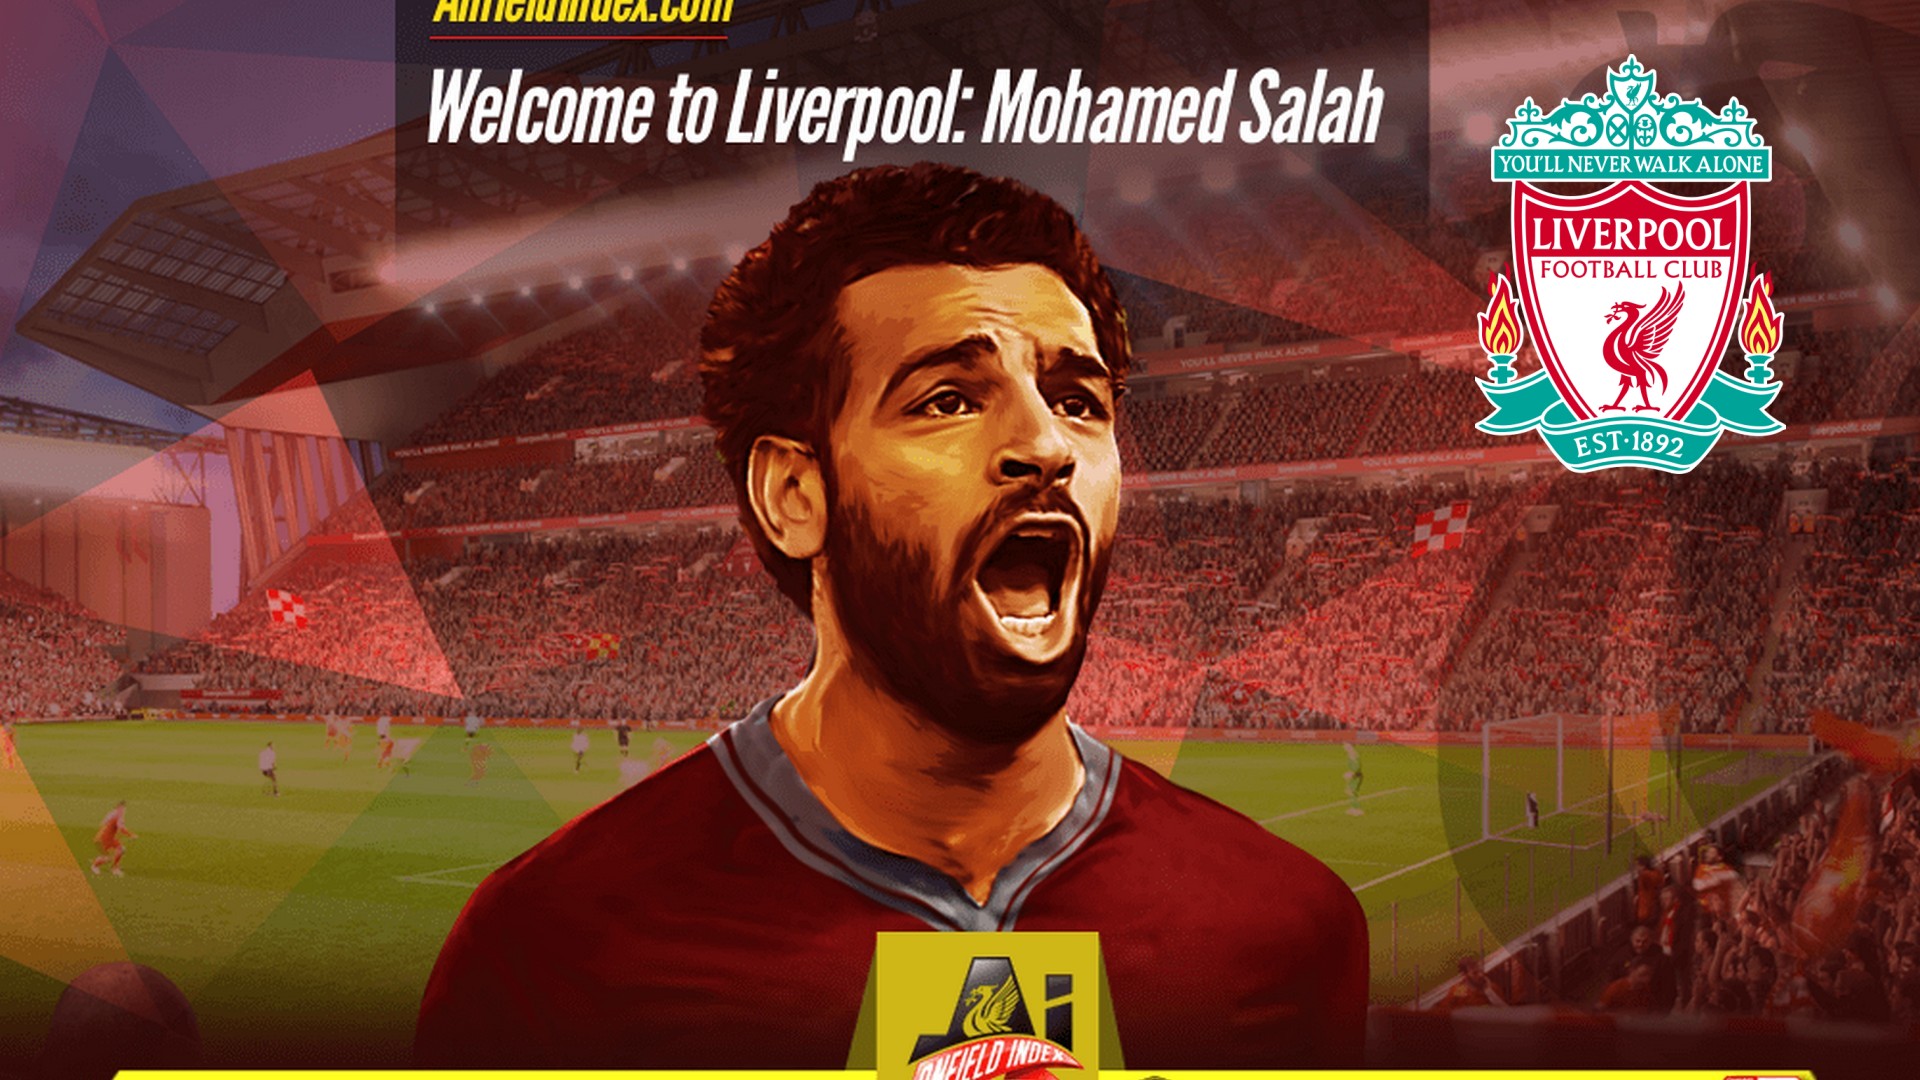 Salah Liverpool Wallpaper HD with image resolution 1920x1080 pixel. You can make this wallpaper for your Desktop Computer Backgrounds, Mac Wallpapers, Android Lock screen or iPhone Screensavers